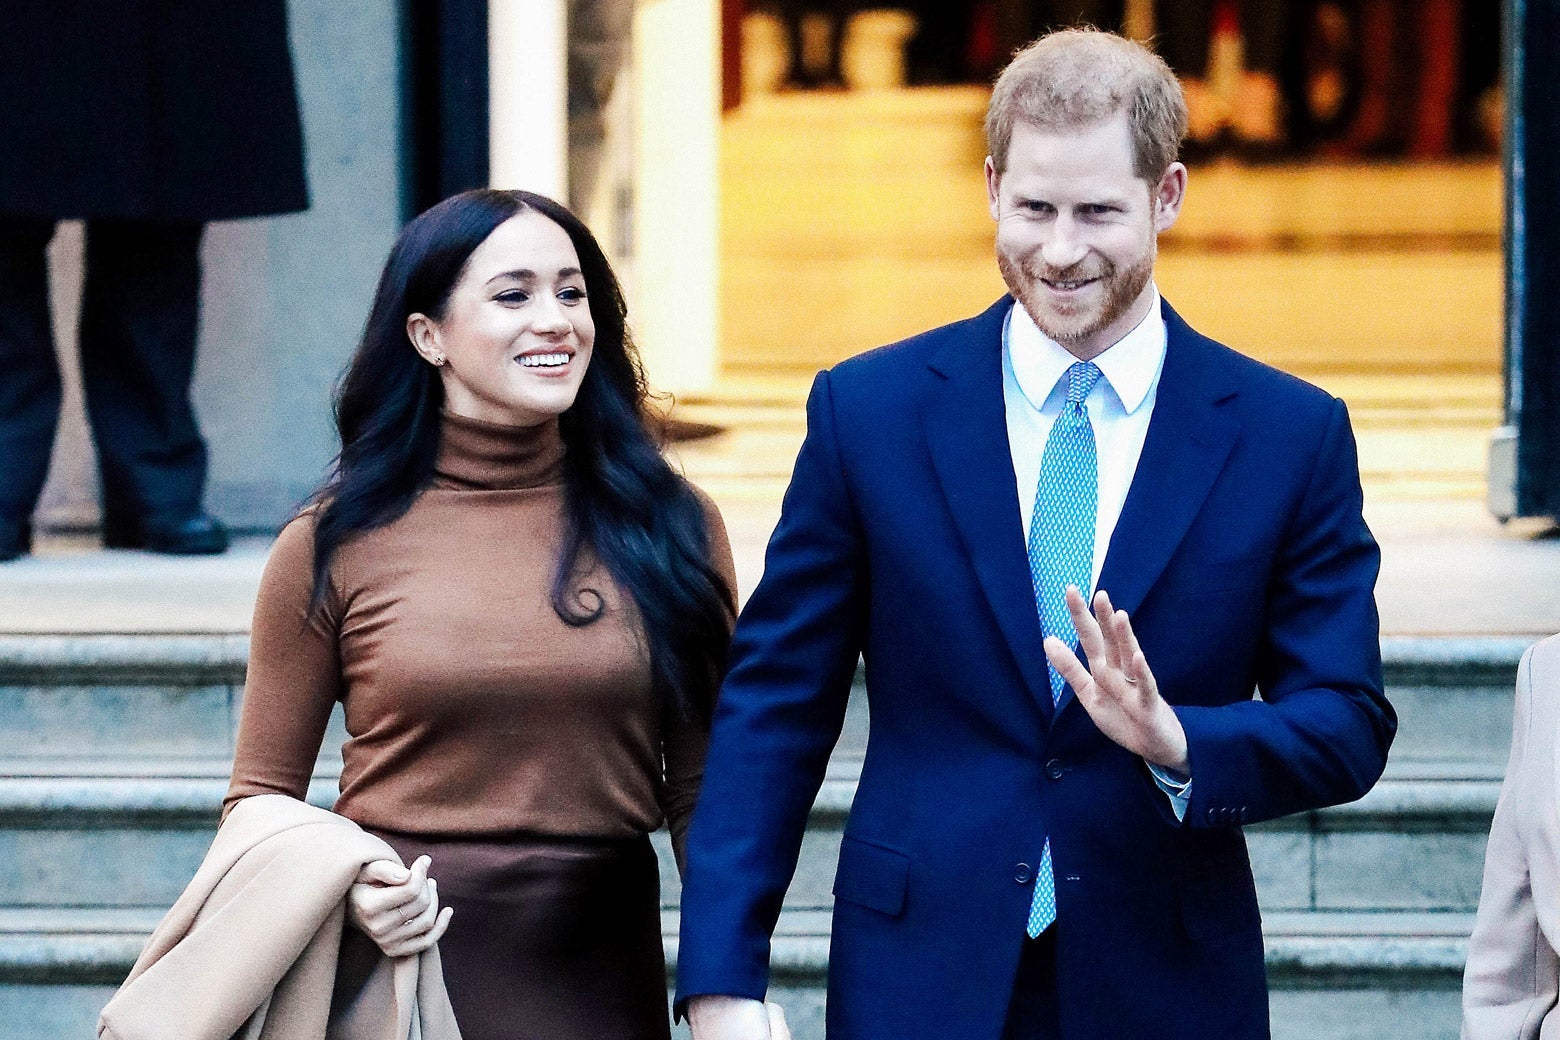 Meghan and Harry are all smiles as they depart Canada House.